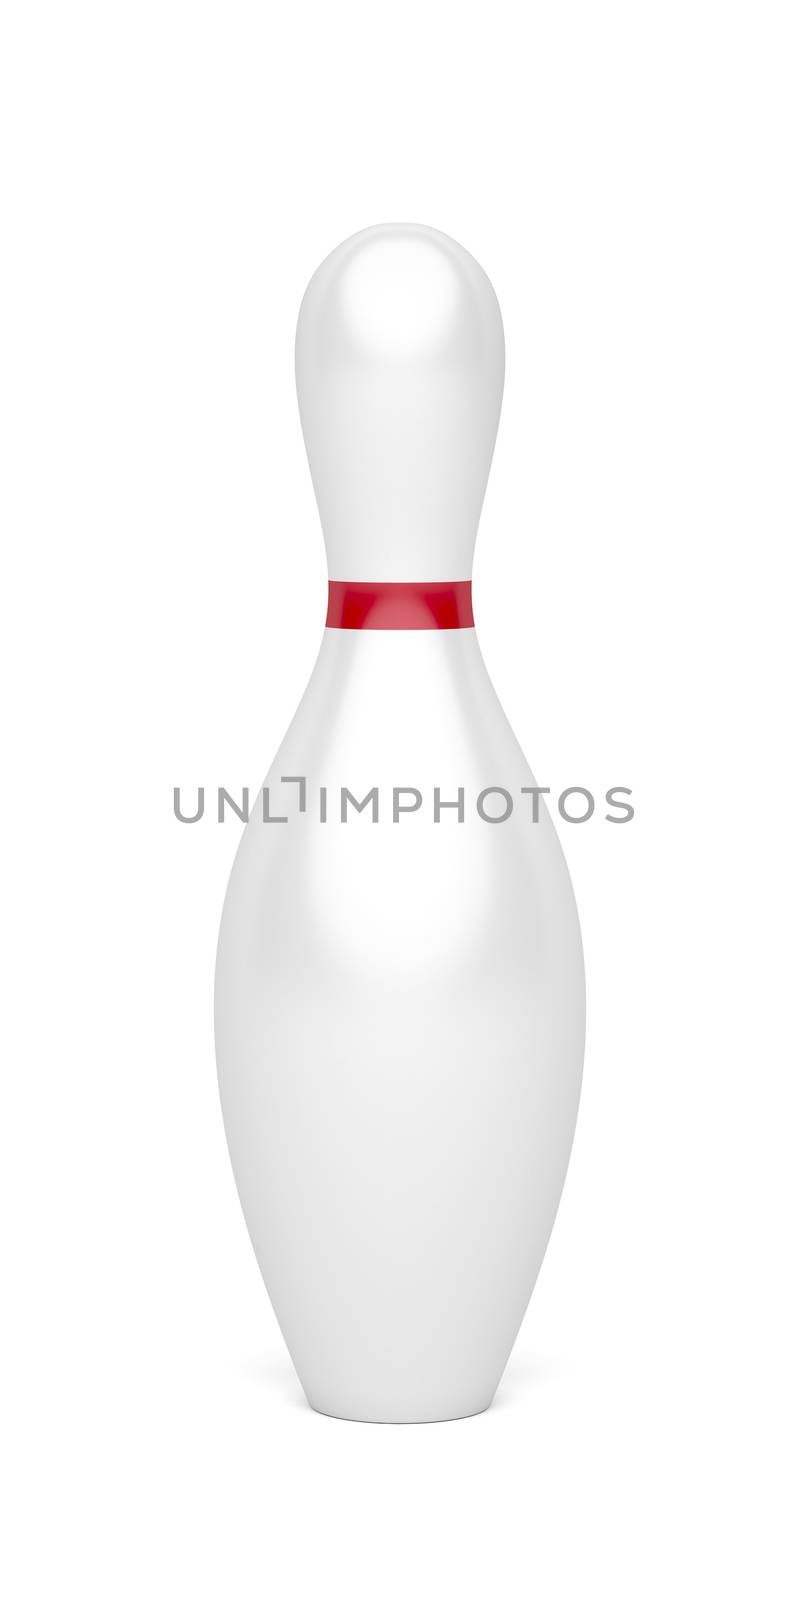 Ten-pin bowling pin by magraphics